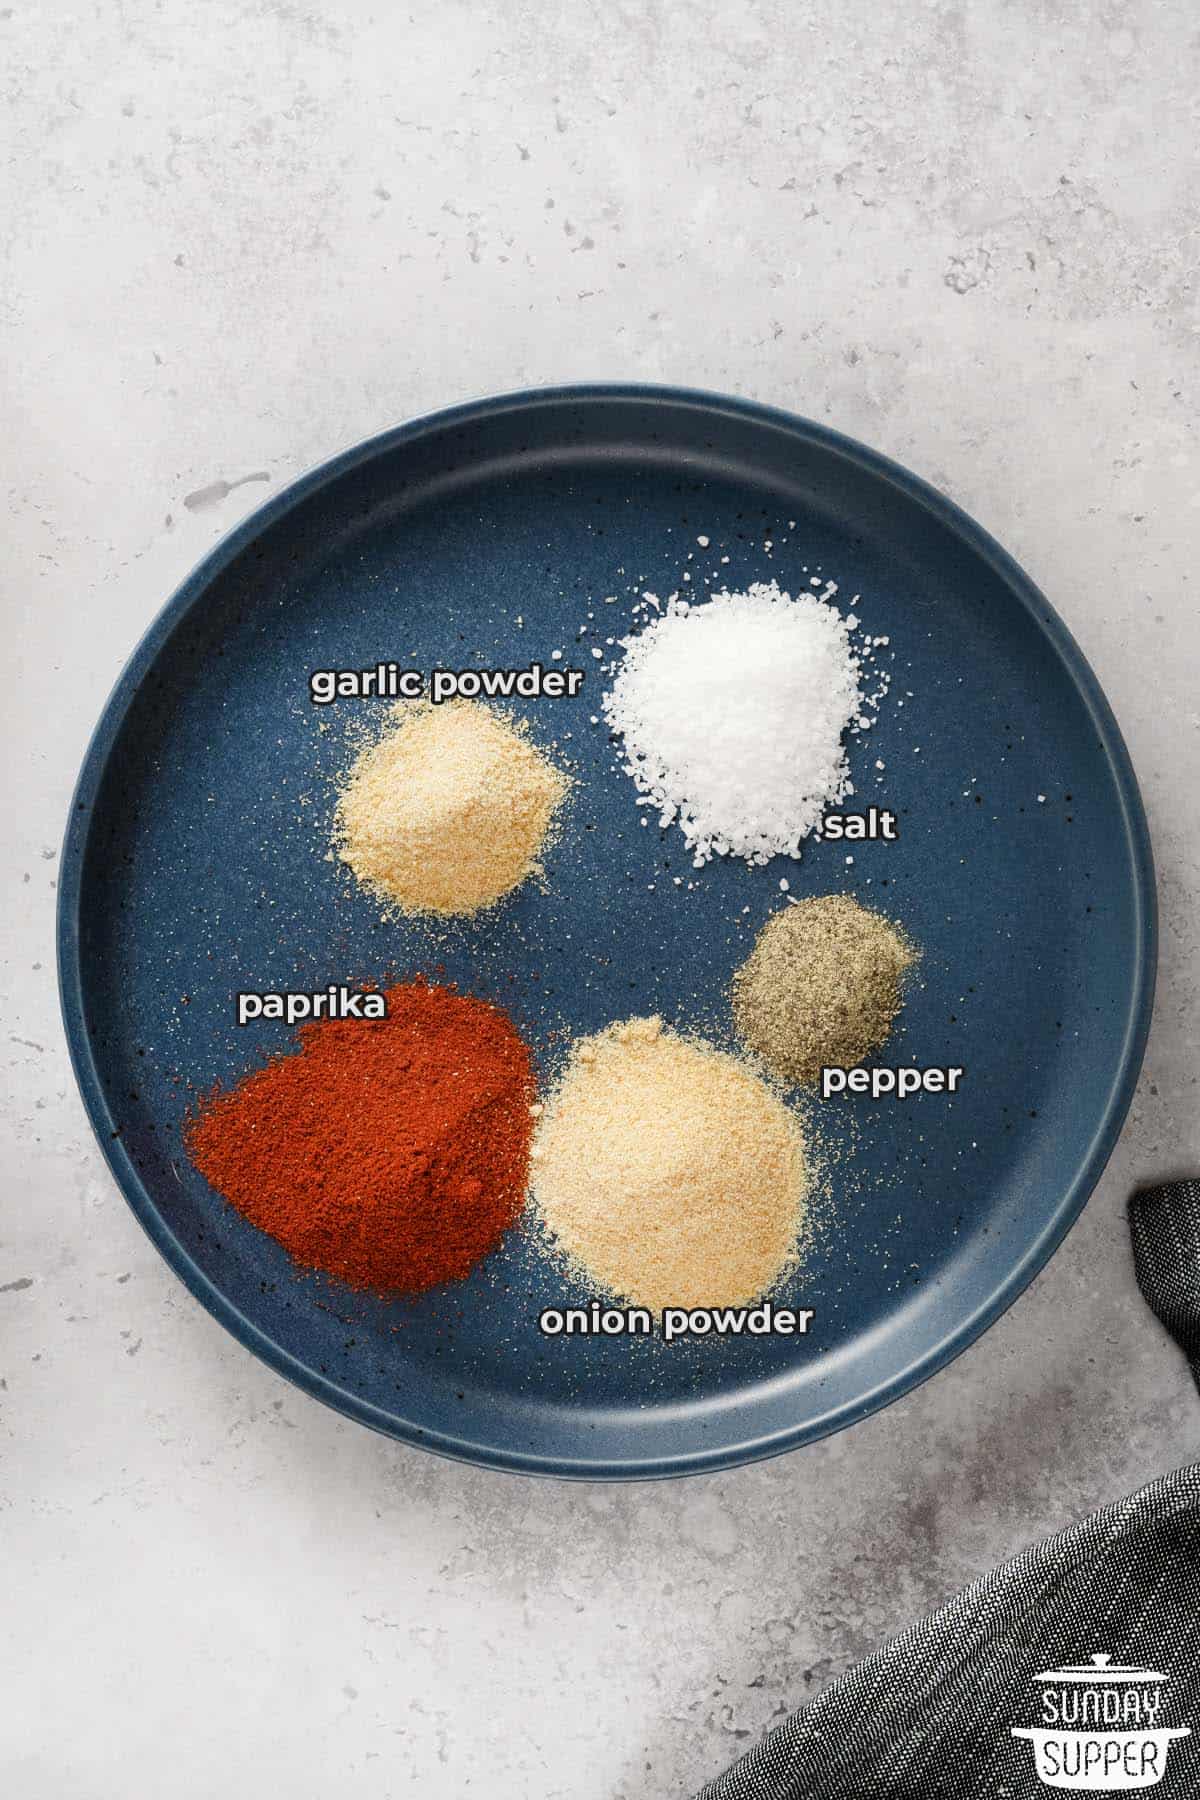 the ingredients for burger seasoning in small piles on a plate